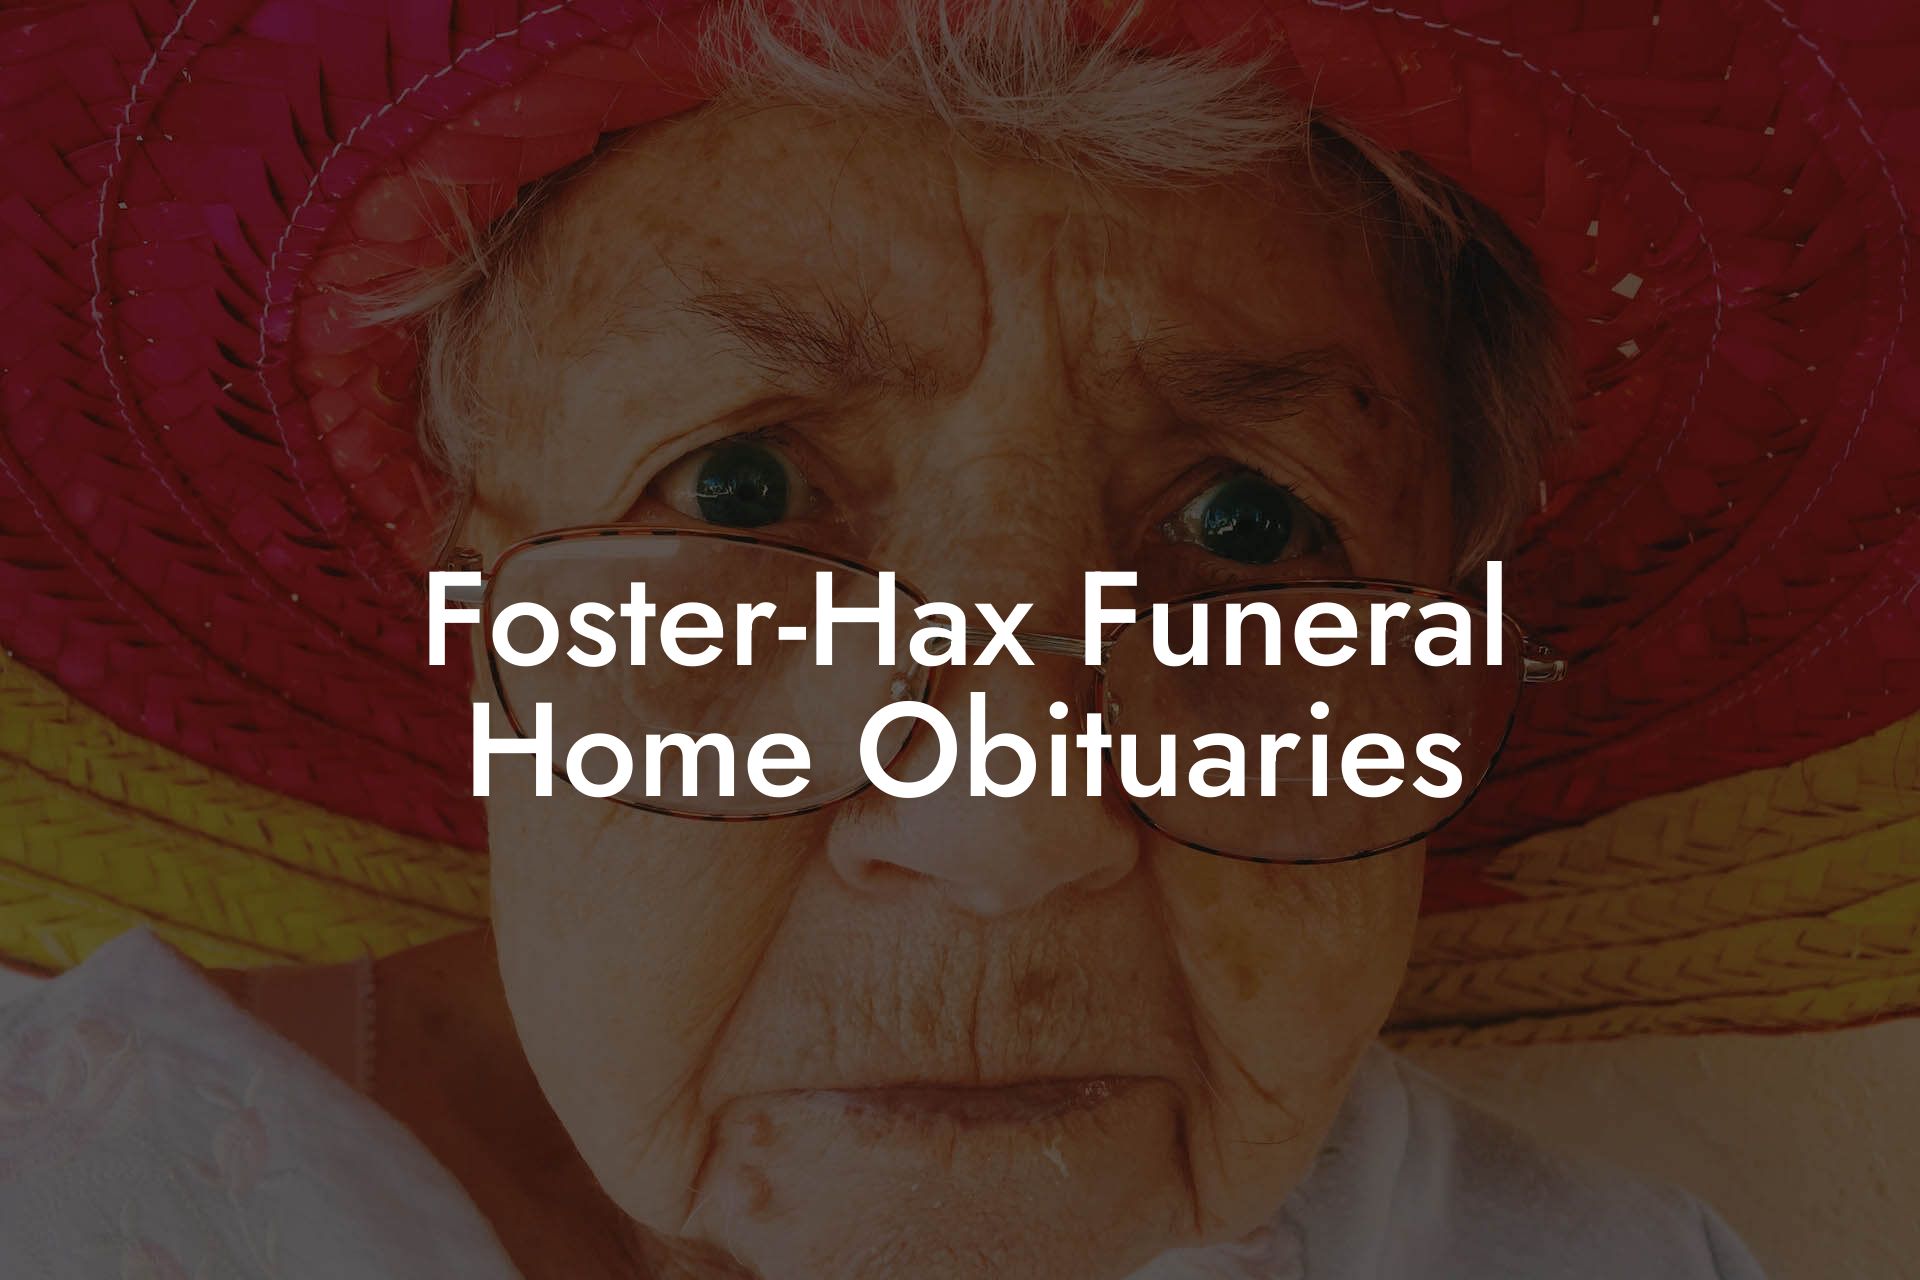 Foster-Hax Funeral Home Obituaries